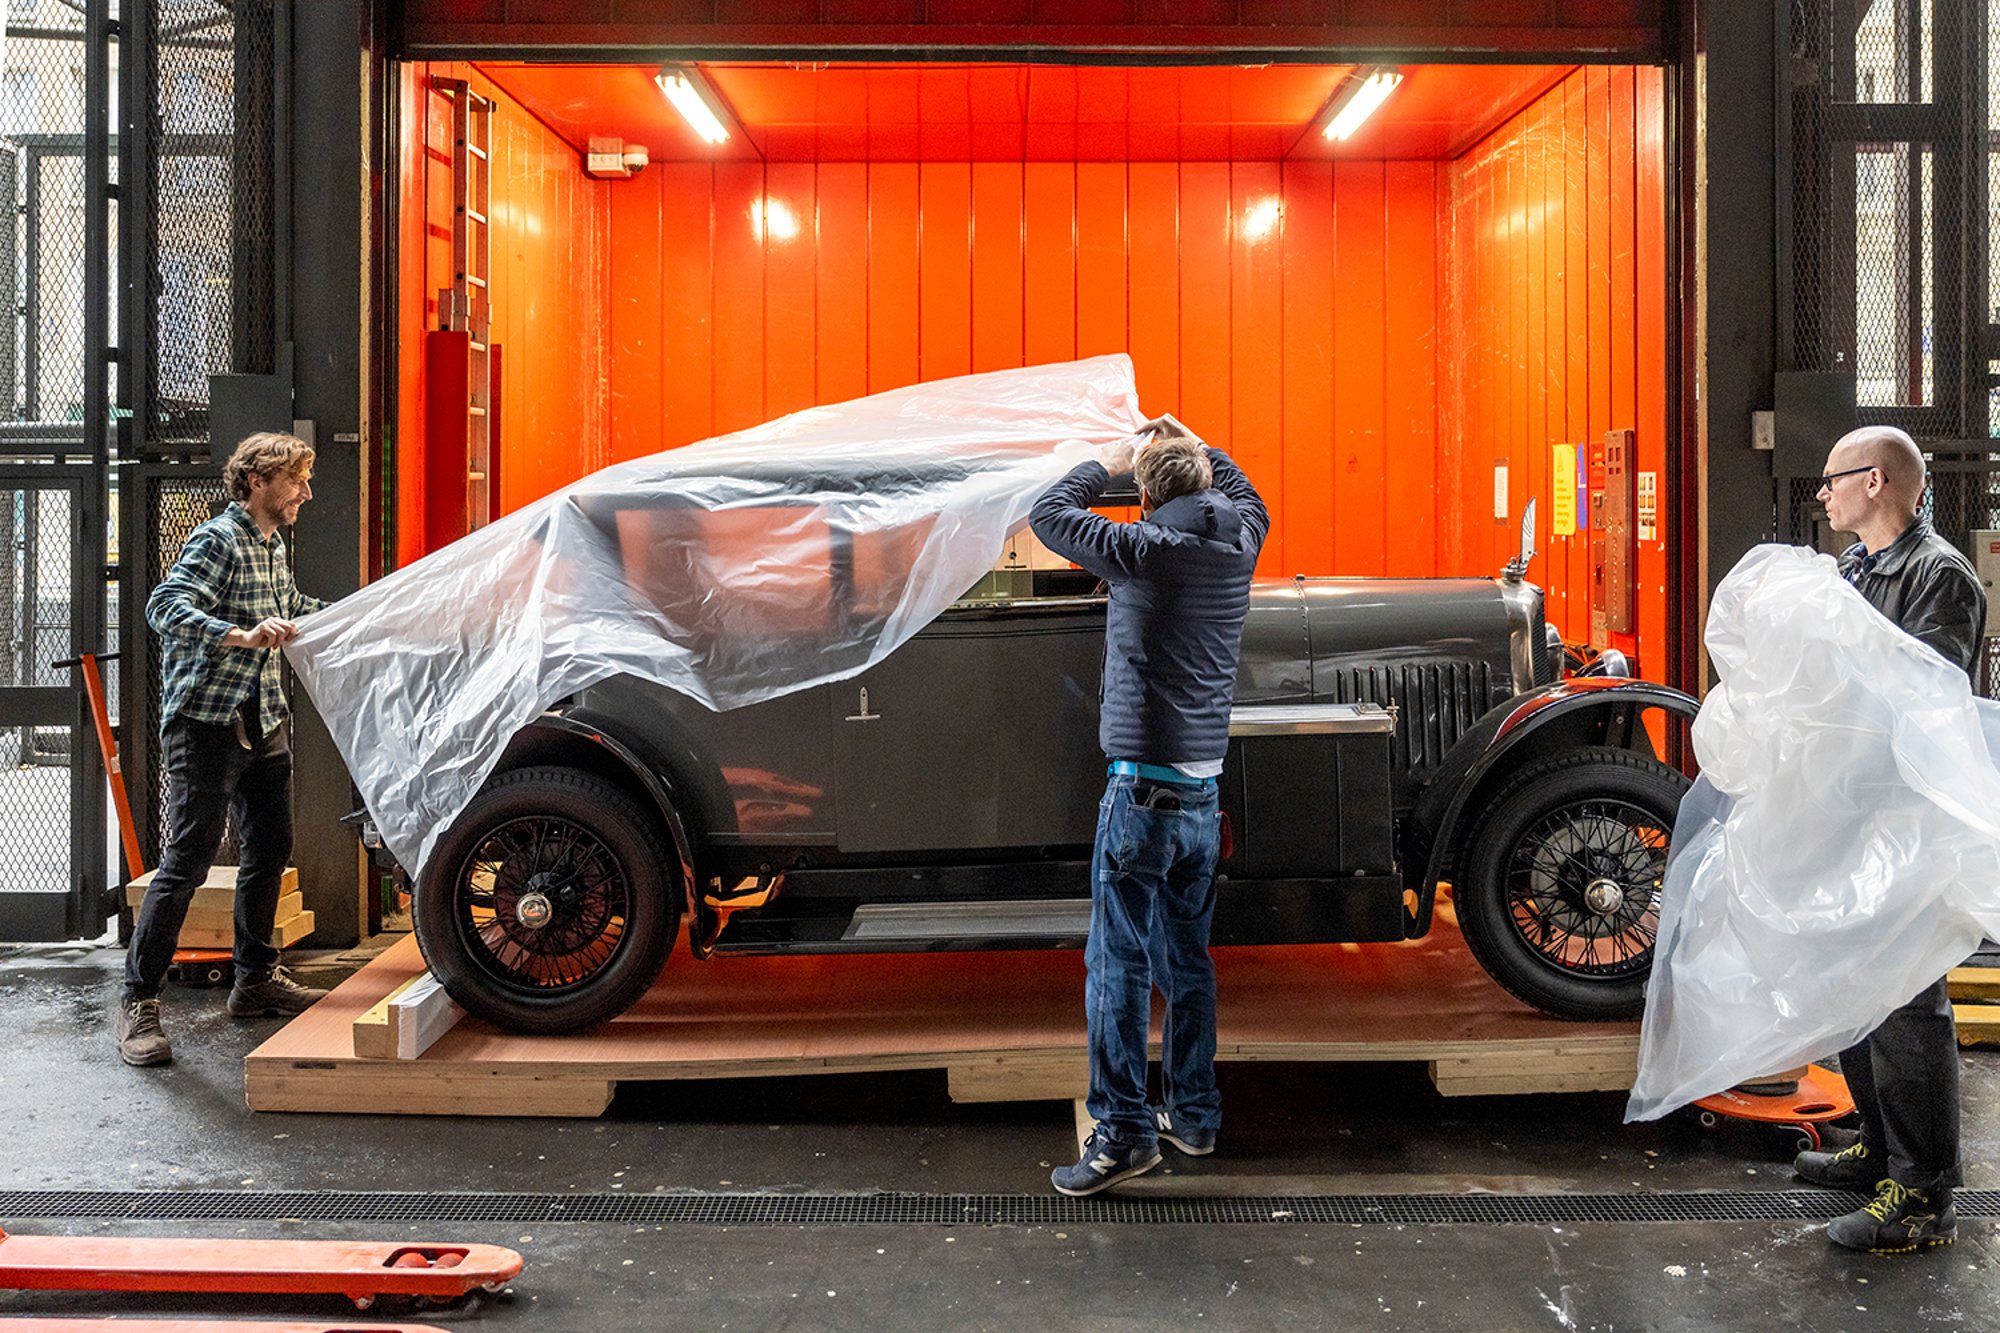 The Voisin C7 Lumineuse being moved into the Centre Pompidou's red service lift, the day after the glider and the Dymaxion arrived. Norman Foster tracked this car down to the actual model owned by Le Corbusier, which featured in photographs of his works in the 1920s.